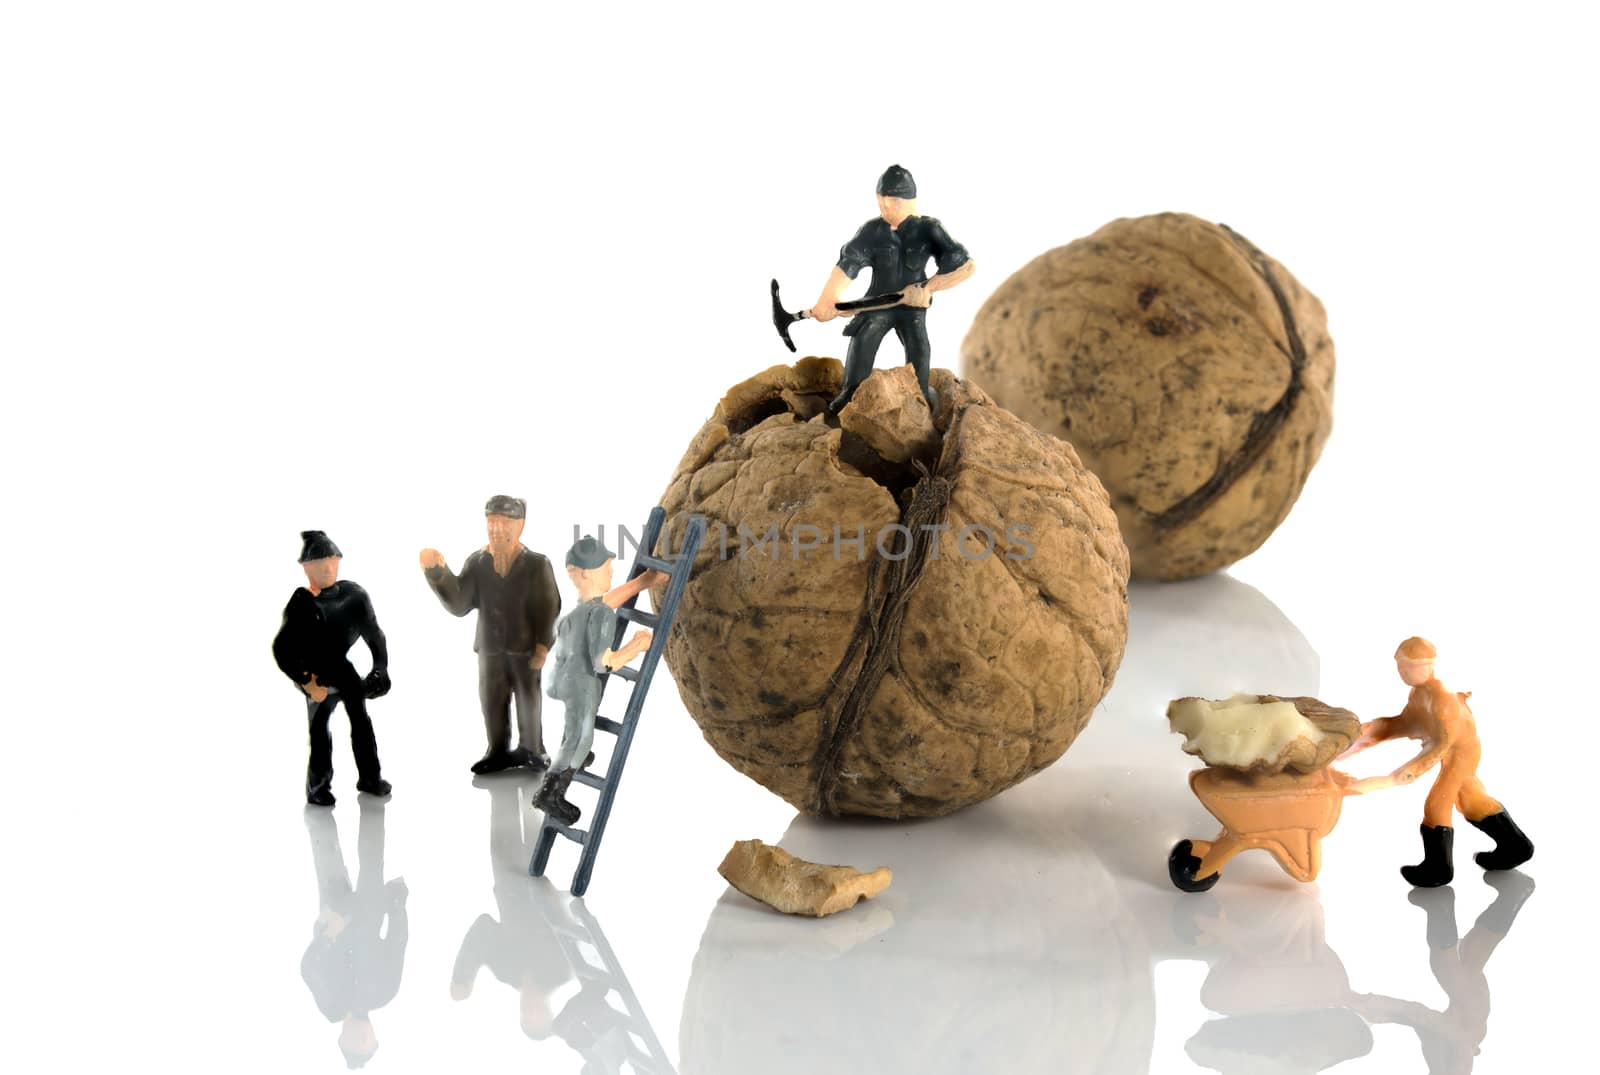 walnut under construction with people working together 